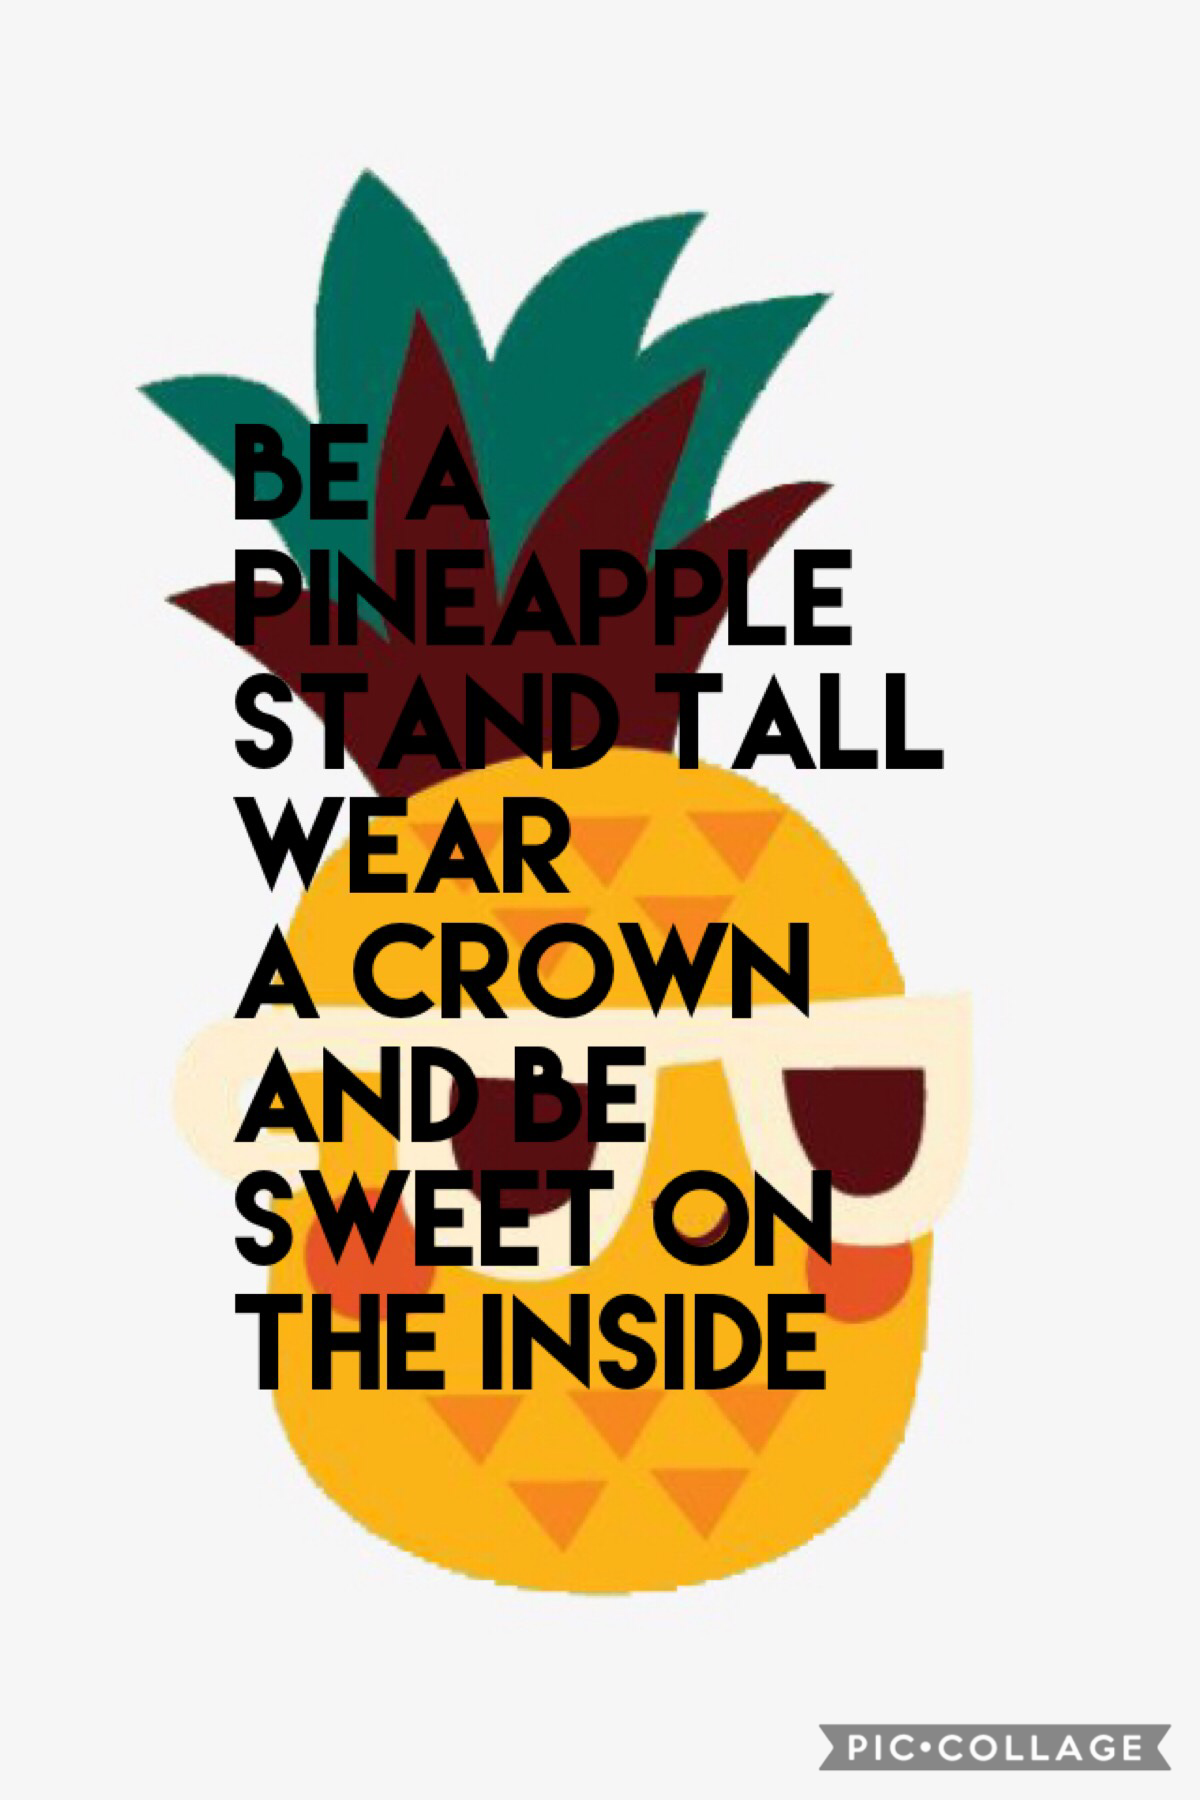 Be a pineapple 🍍 